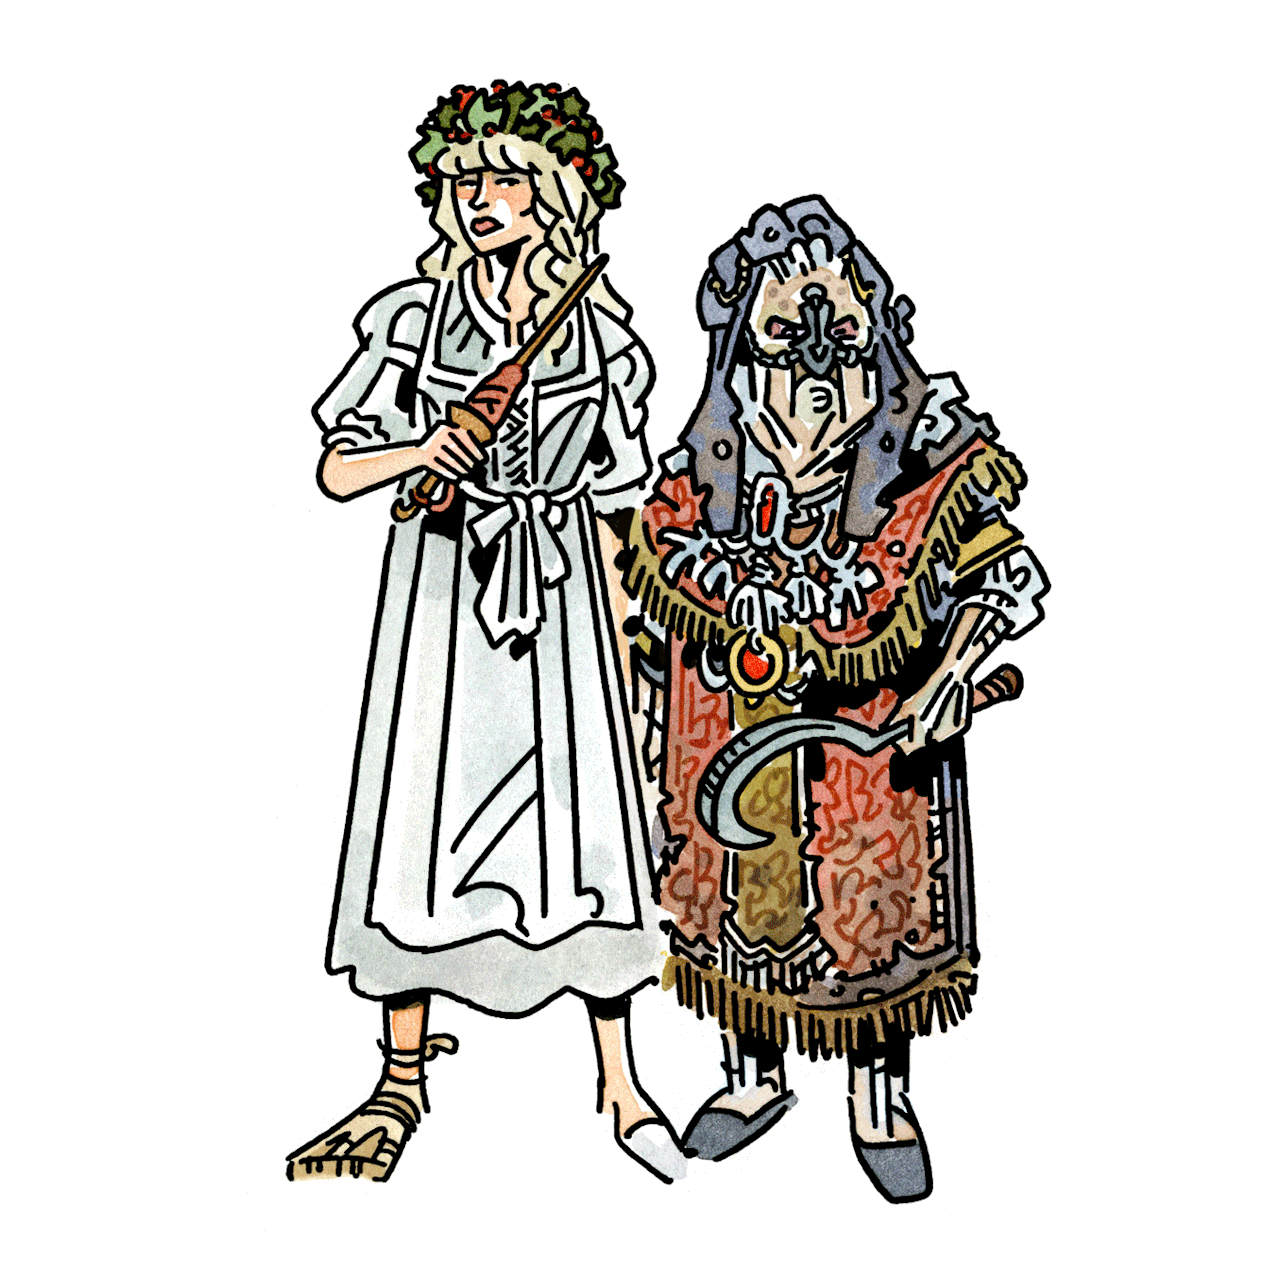 Companions of Christmas 9: Perchta and Holda!
This pair of magical sisters have been in Germany since ancient days; Perchta (left, in both images) in the north, Holda (right in both), the south.
The first spinners, they taught people how to make...